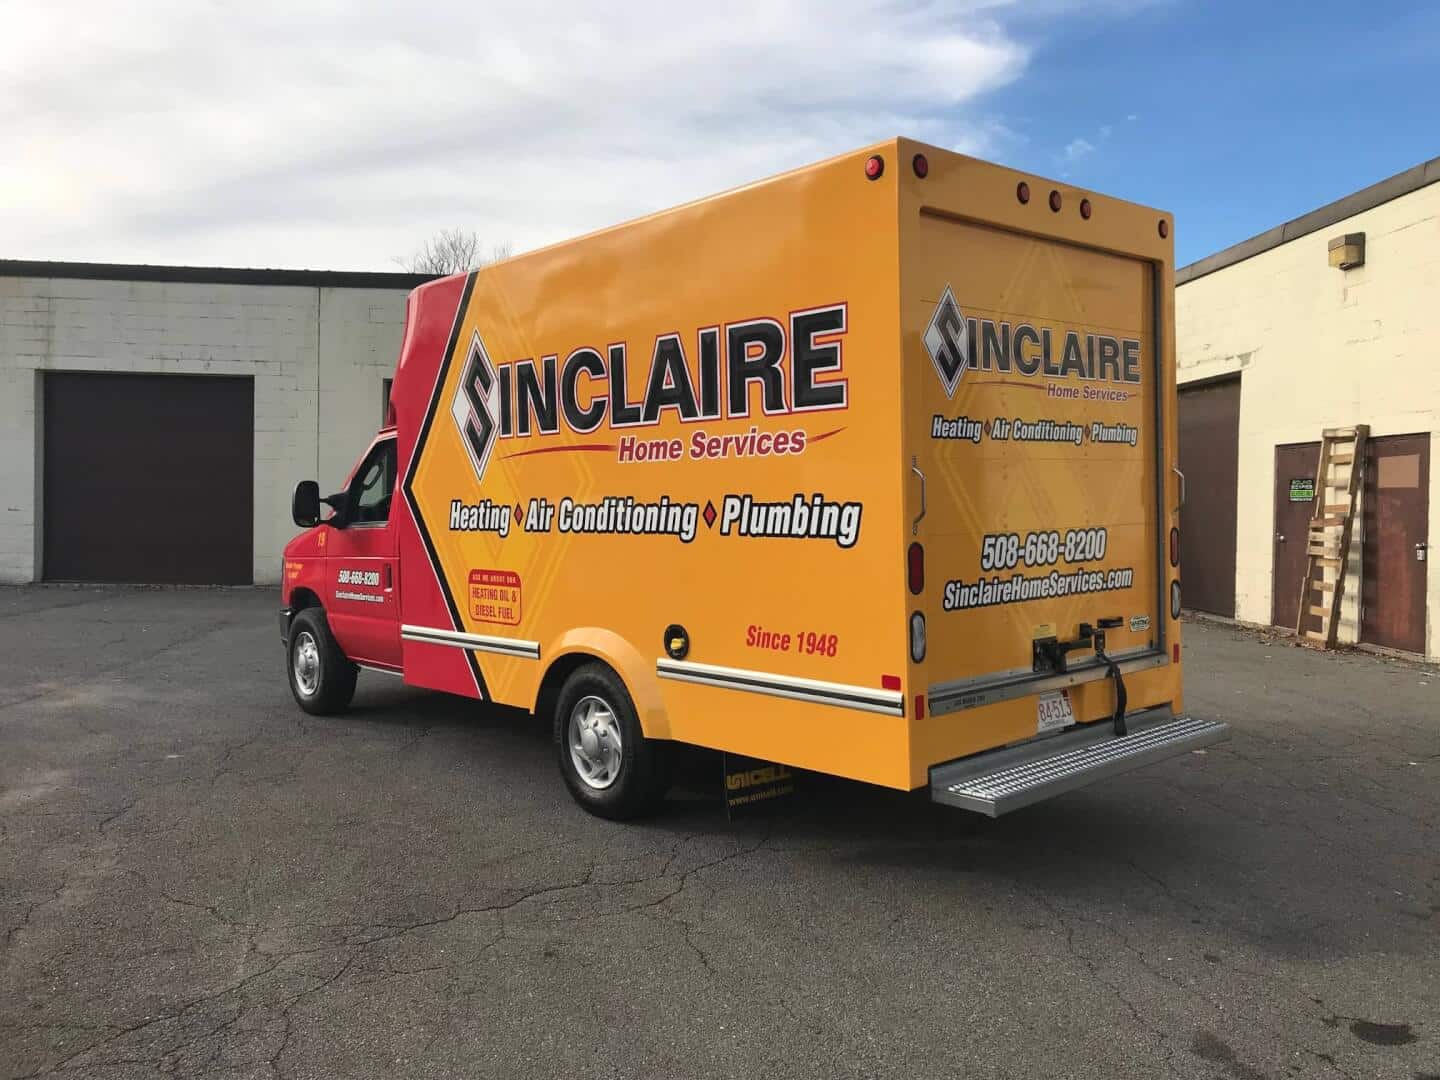 A Sinclaire Truck parked outside the office